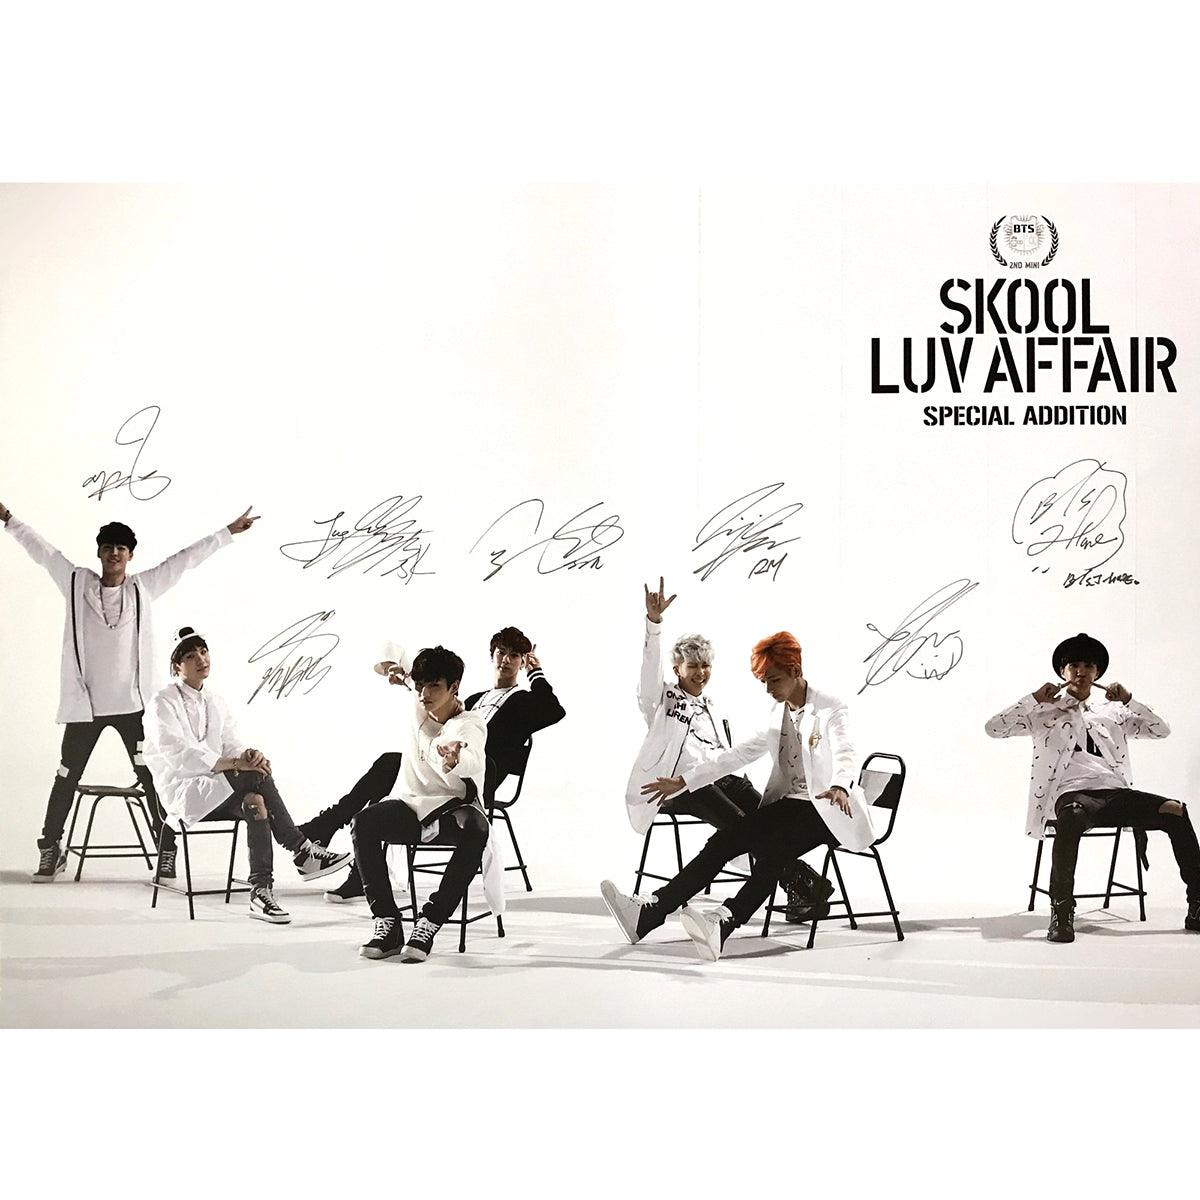 BTS SPECIAL ALBUM 'SKOOL LUV AFFAIR SPECIAL ADDITION 2020' POSTER ONLY - KPOP REPUBLIC